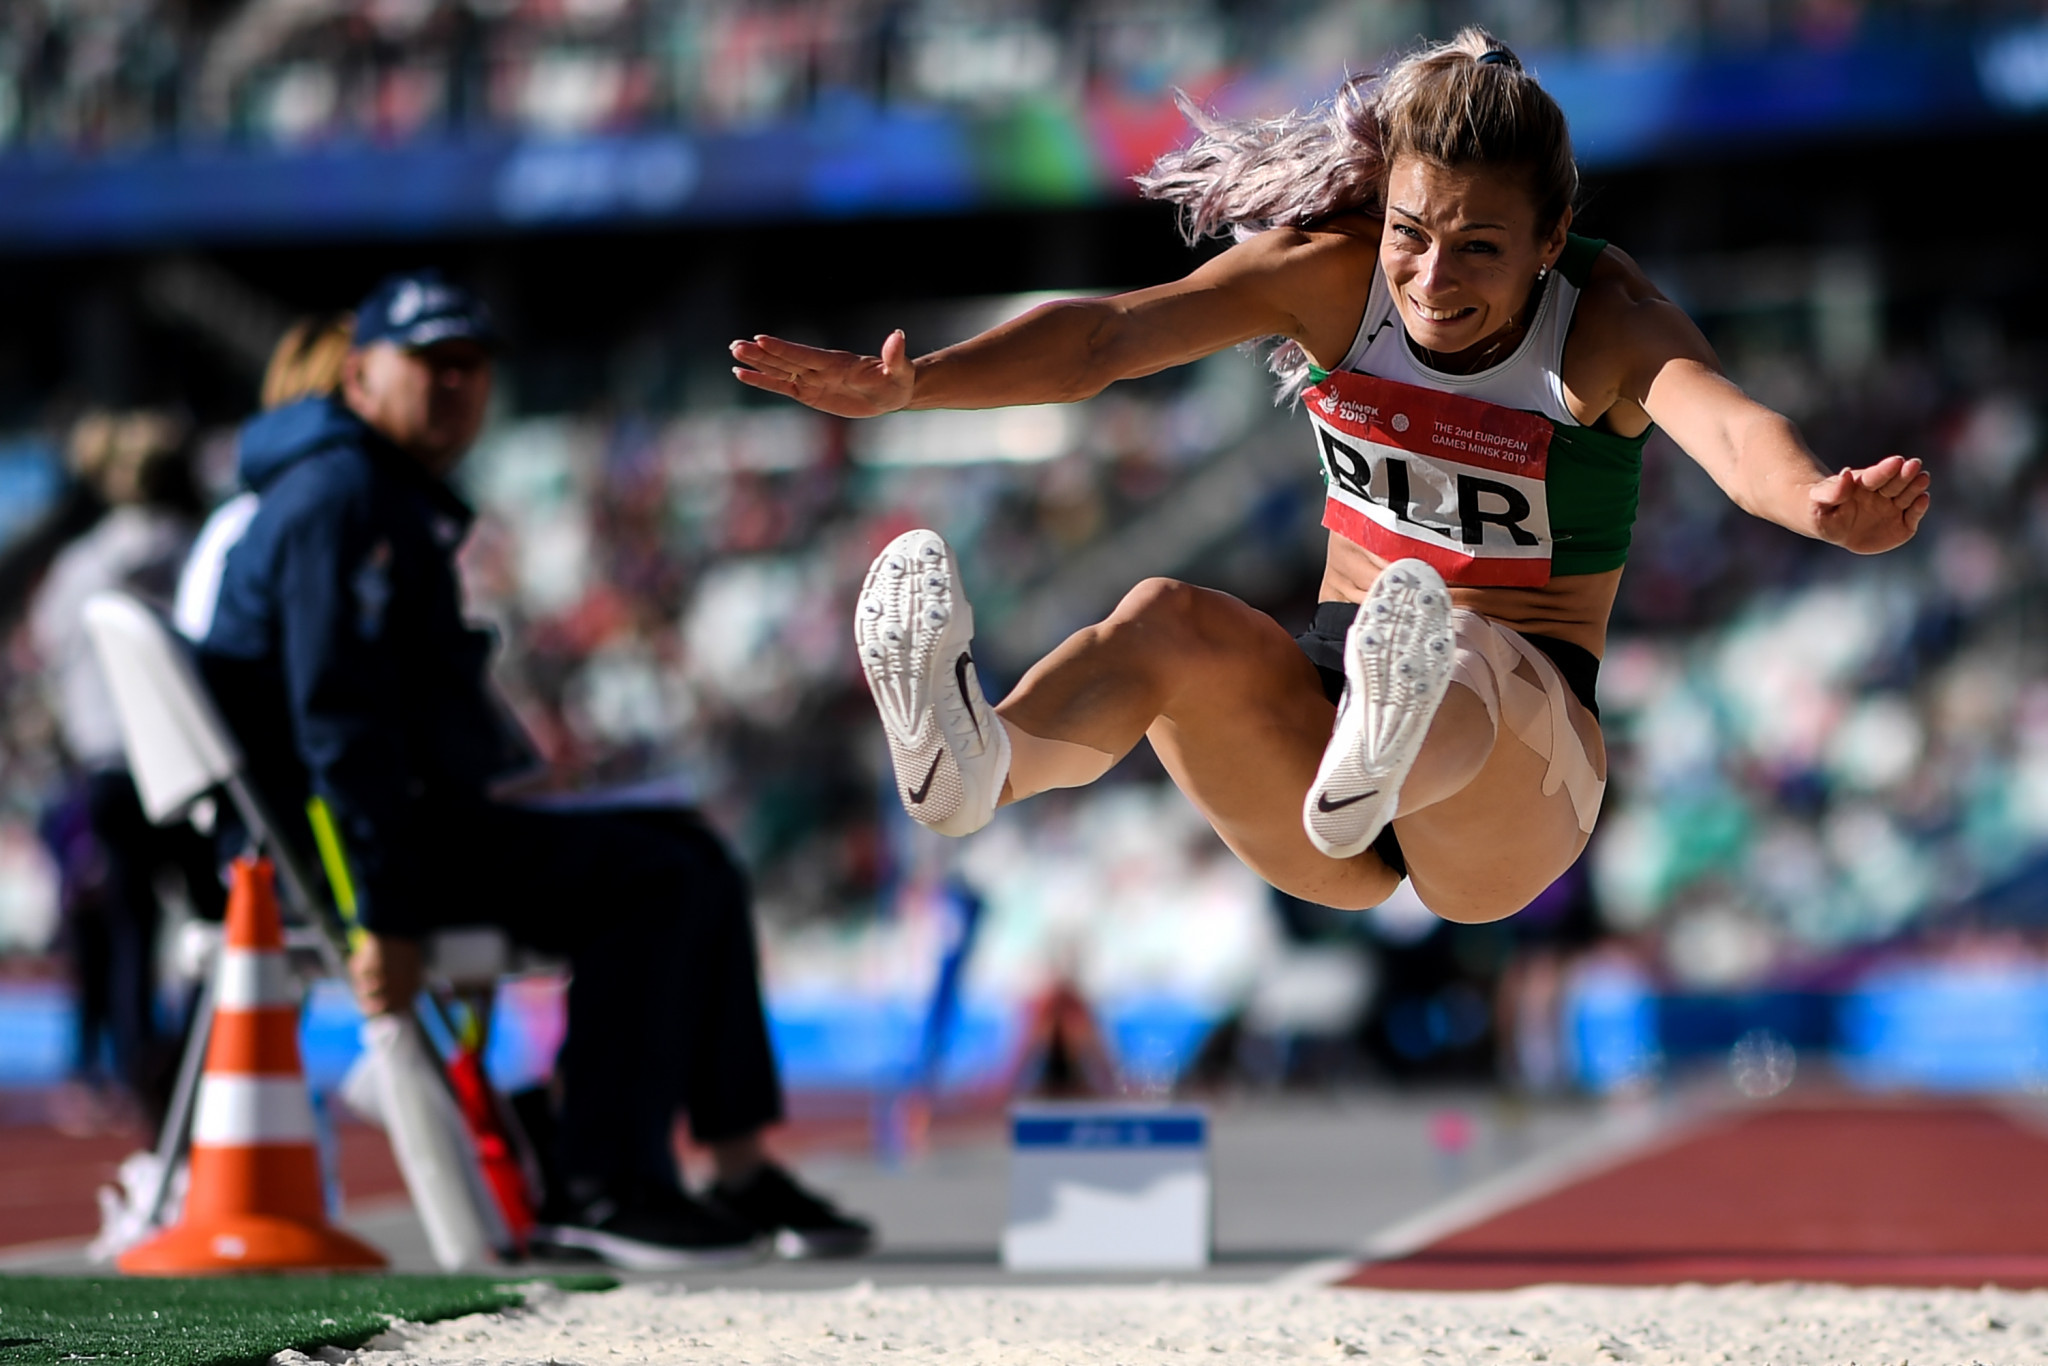 Hosts Belarus looked set to win gold after coming out on top in the track and field events ©Getty Images